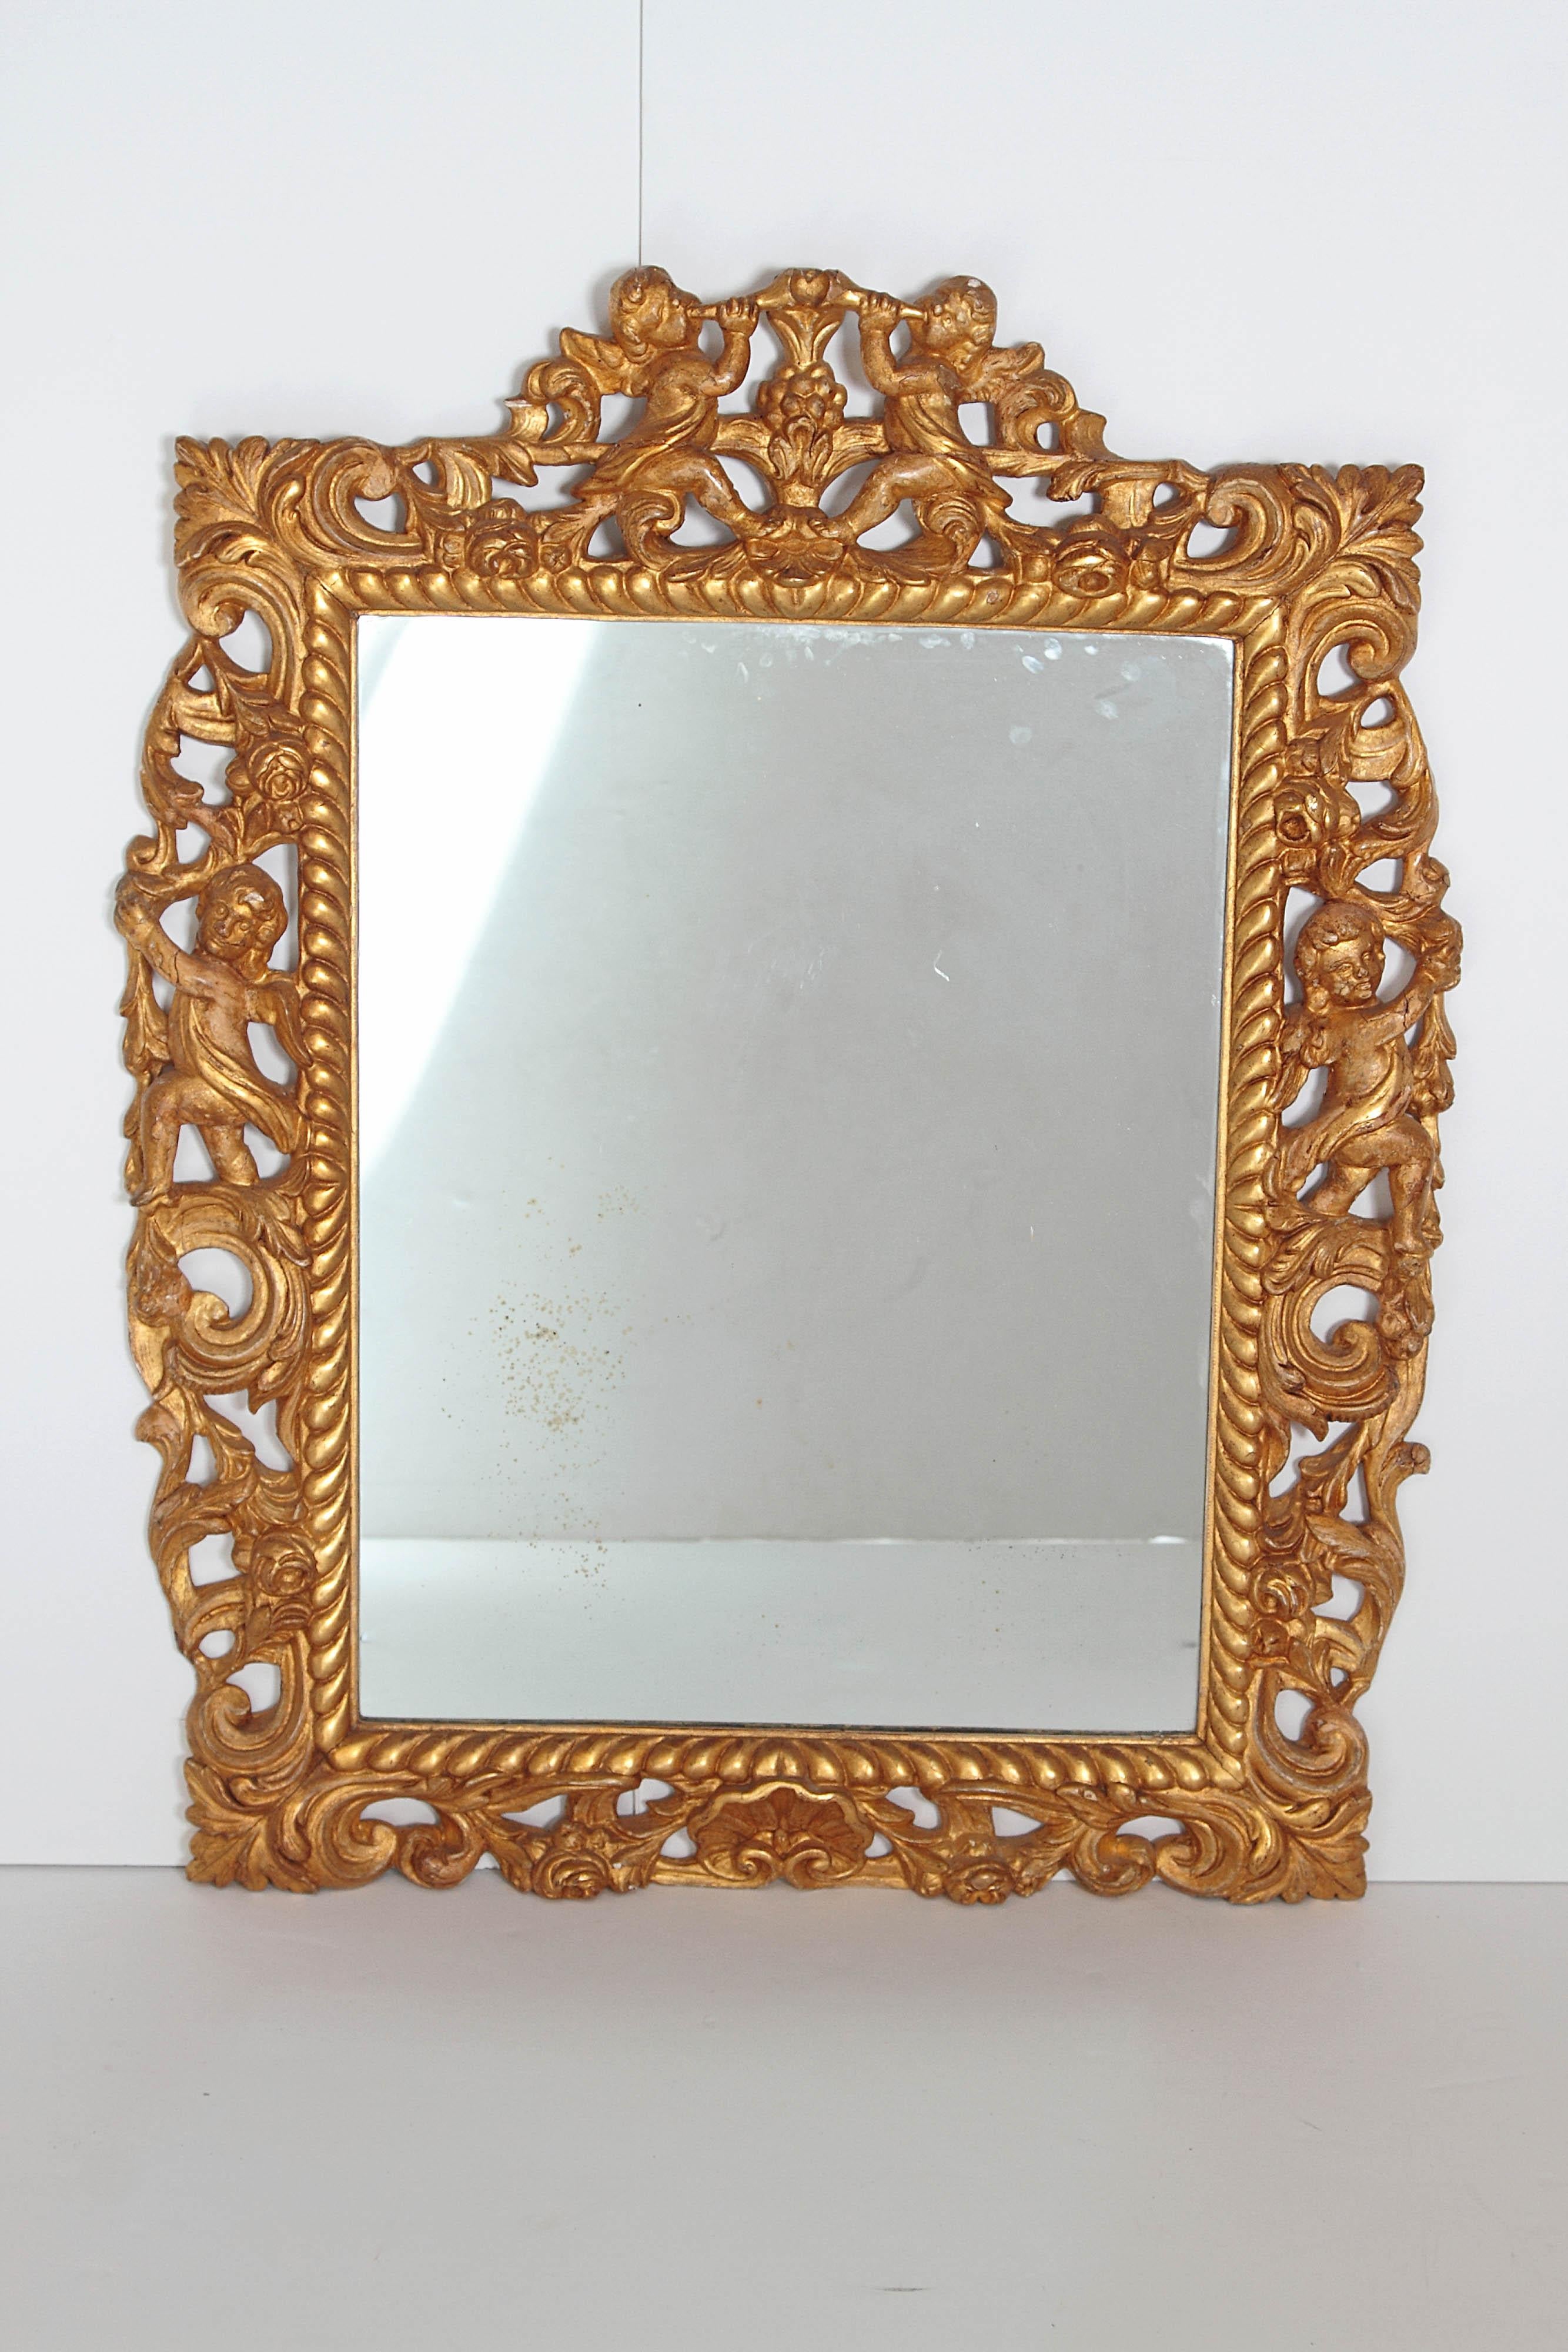 A Charles II carved and gilded wooden frame with replacement plate / mirror glass. Carved gadroon / rope motif around mirror. Frame with overall acanthus leaf carvings with putti left and right of mirror, small shell centered under mirror. Above two